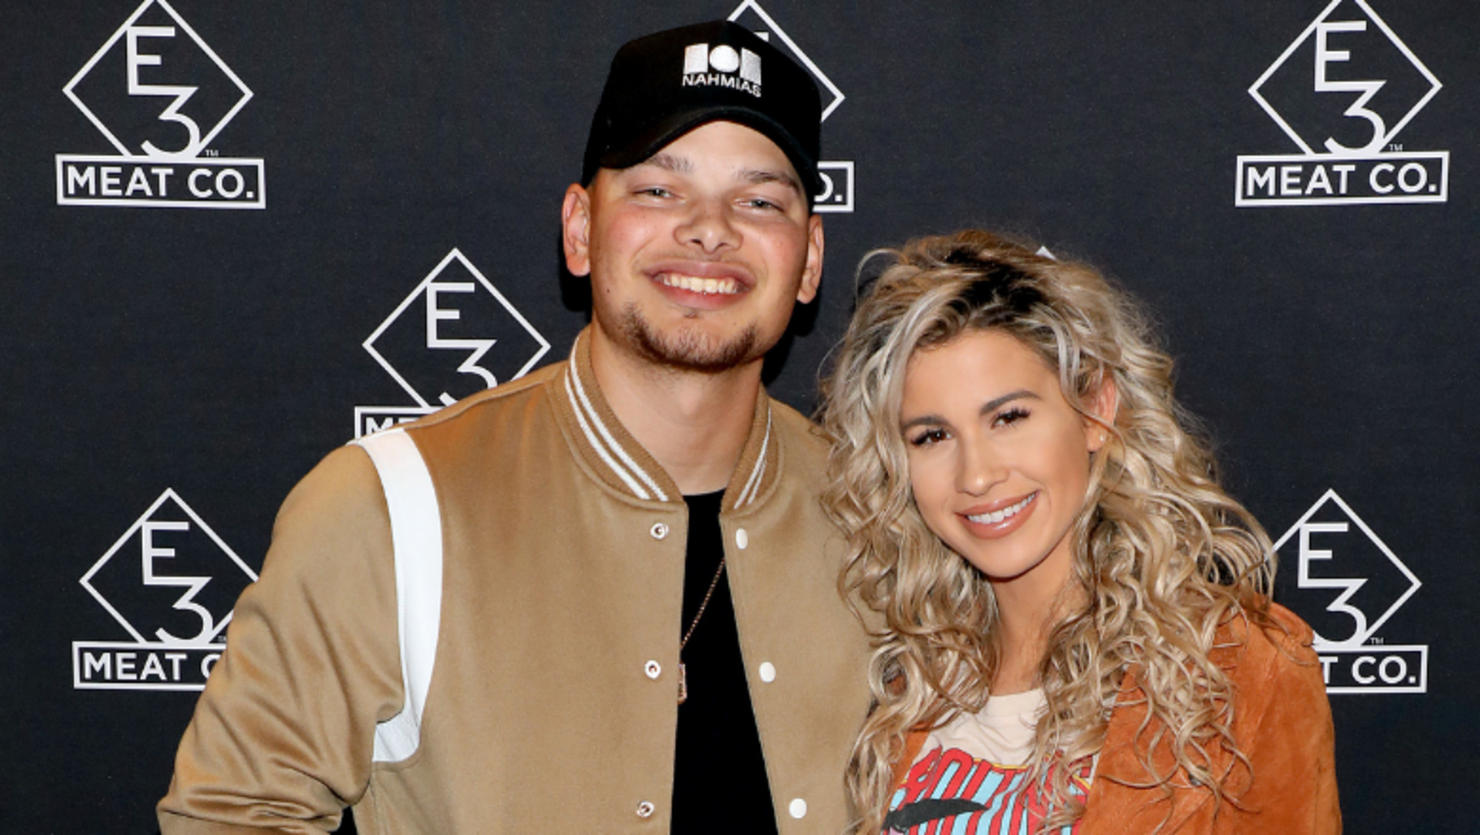 Kane Brown Shows Off His Cute Little Family In New Photo